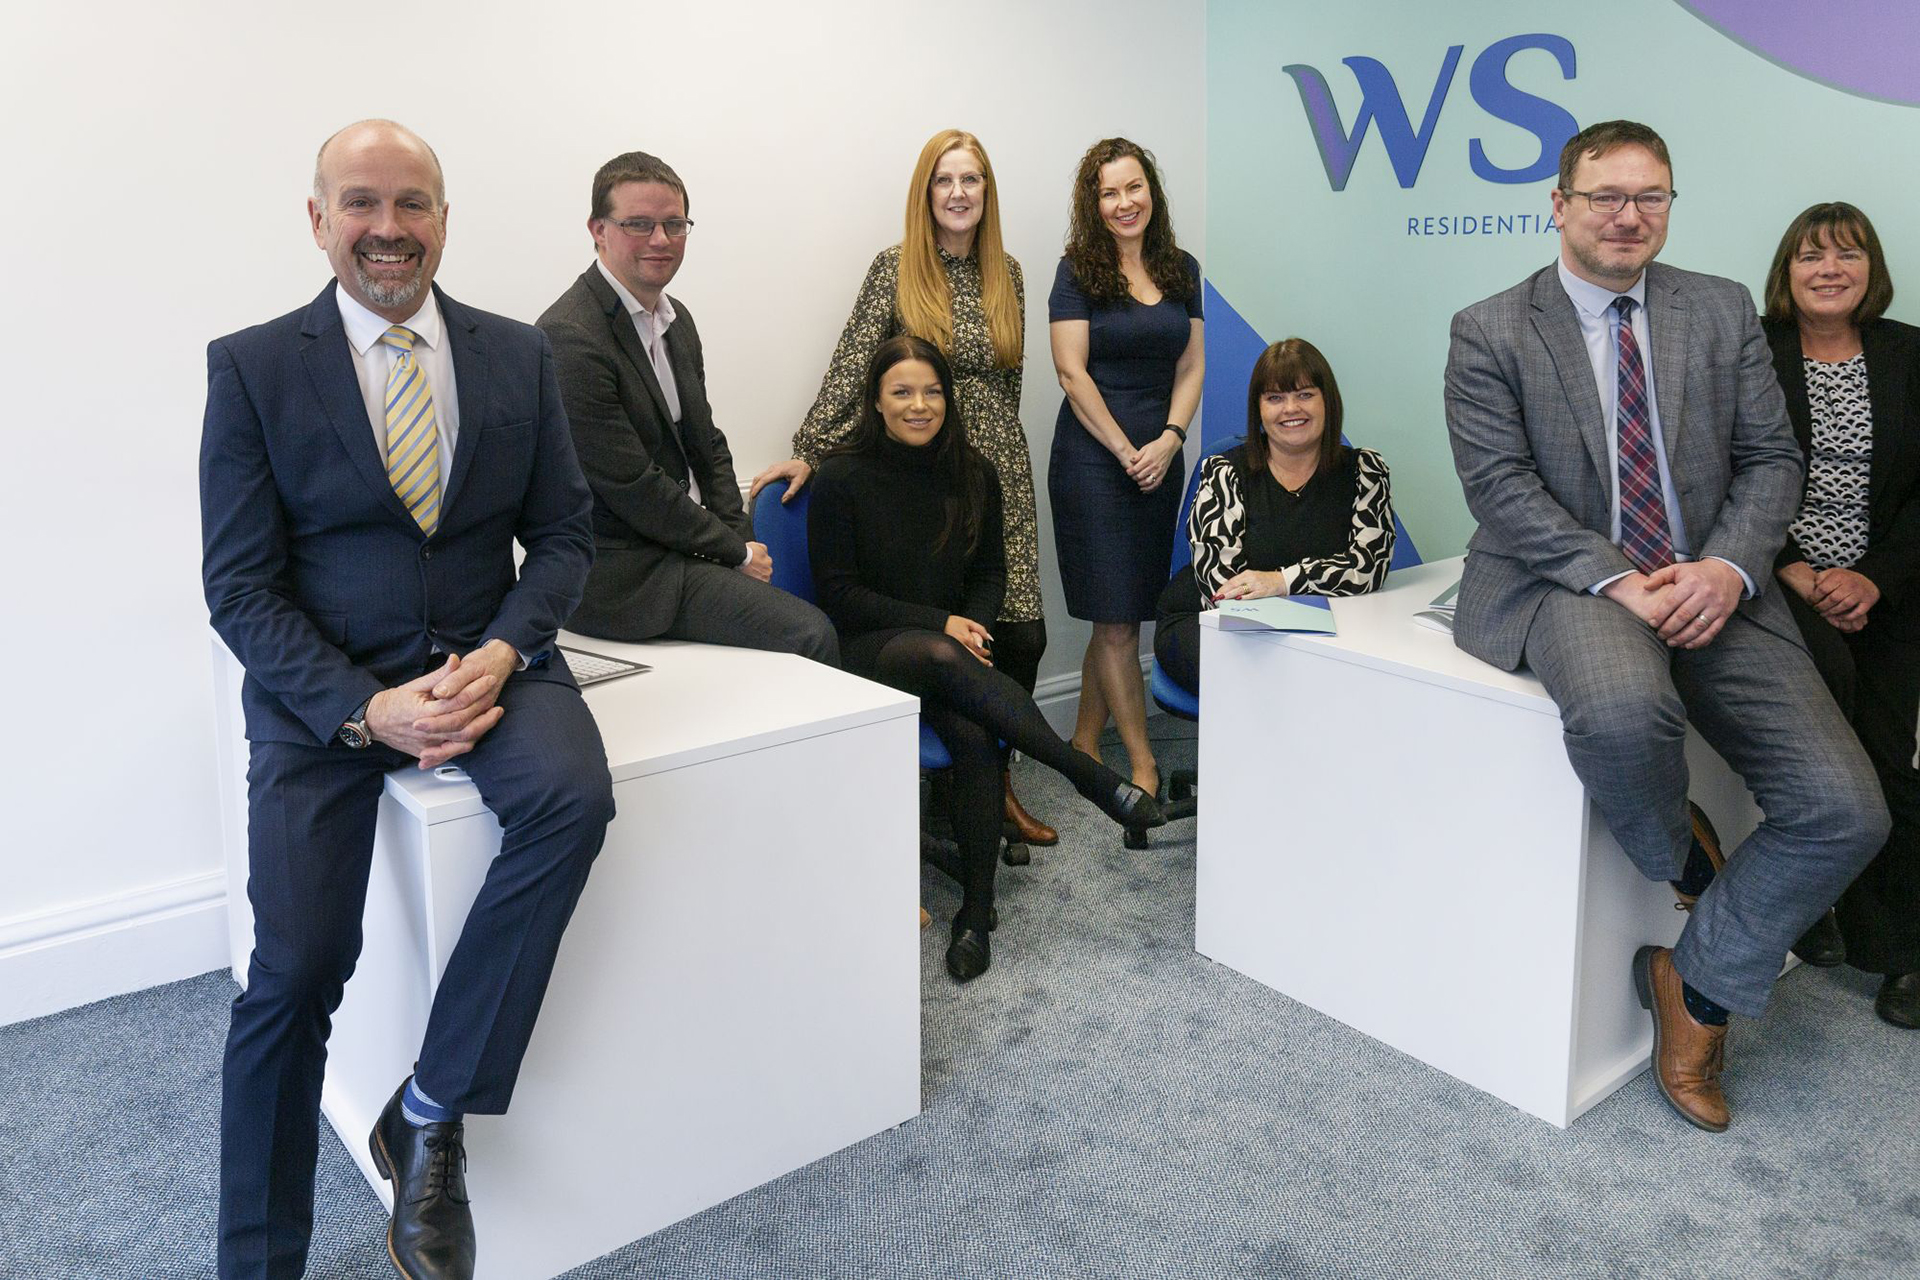 WS Residential launches as part of Walker Singleton's West Yorkshire expansion strategy